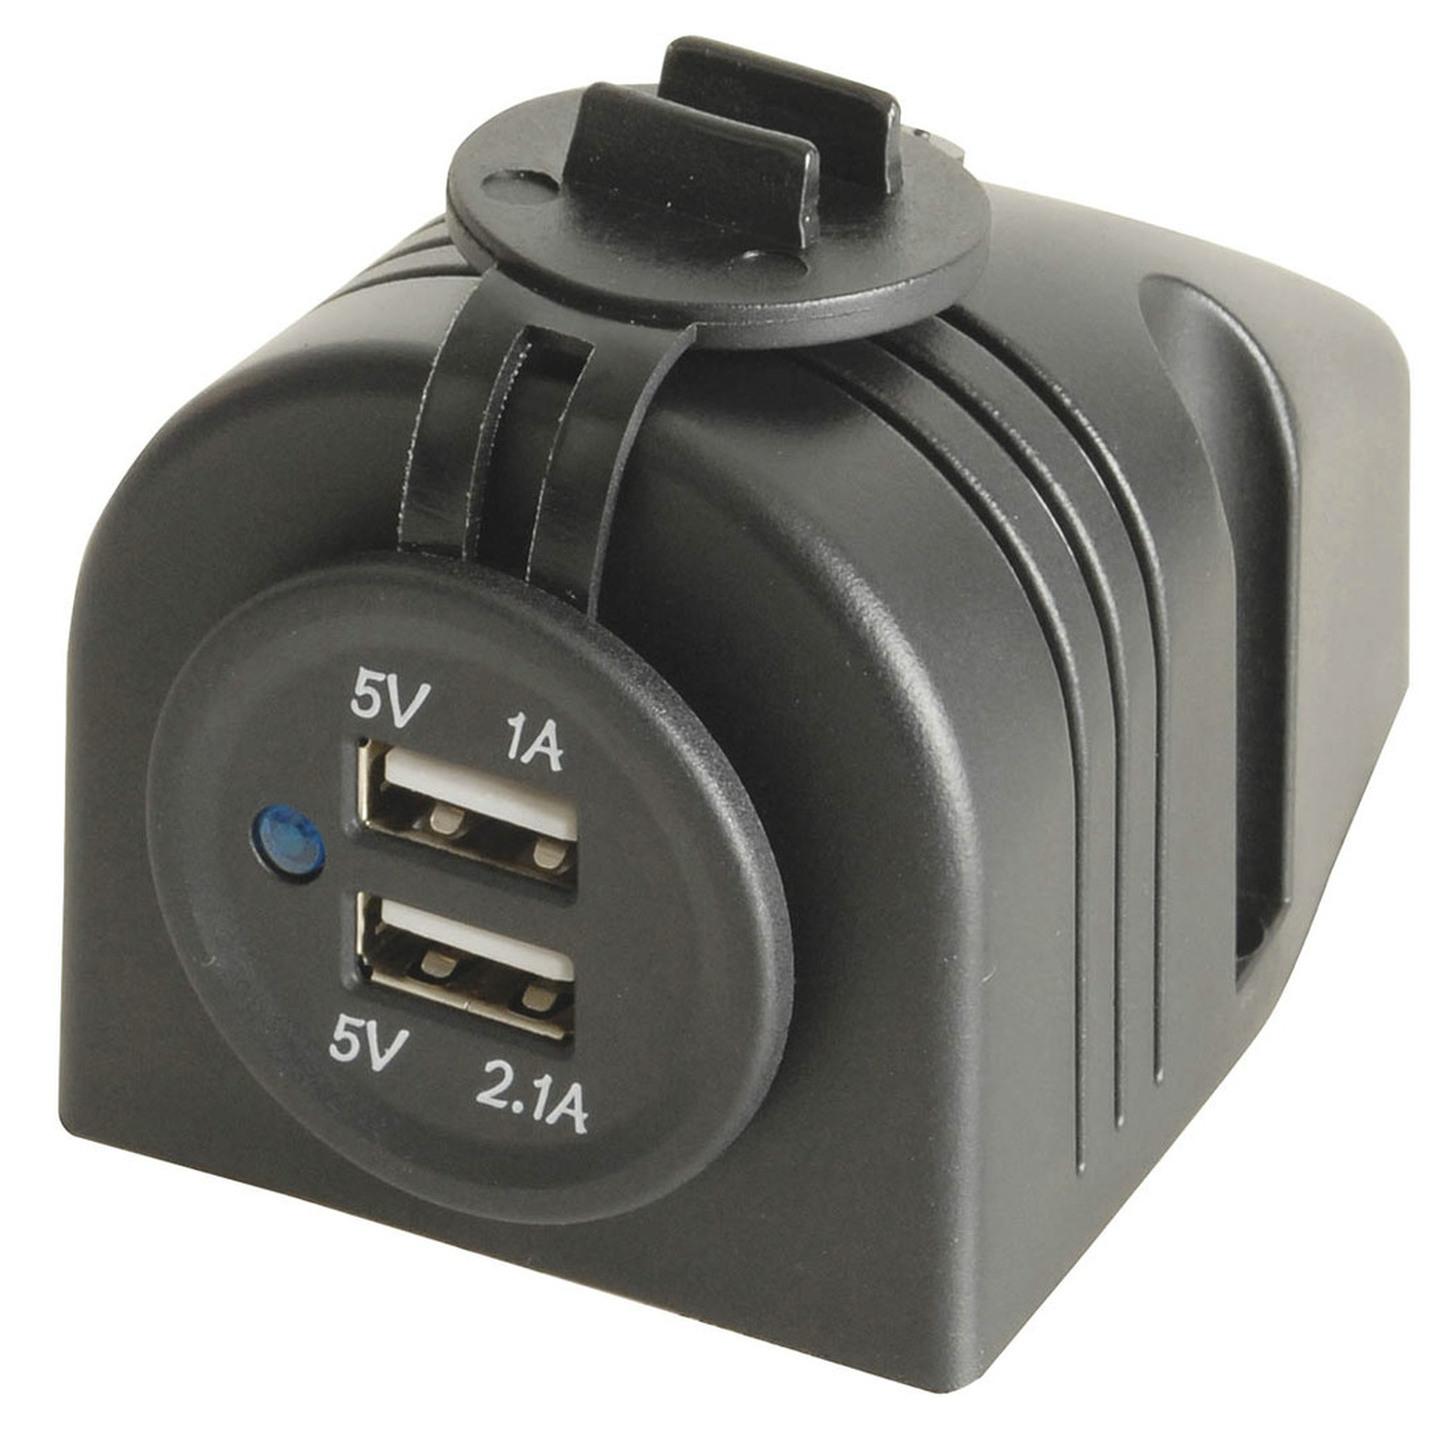 Twin USB Panel or Surface Mount Outlet 5V 3.1A